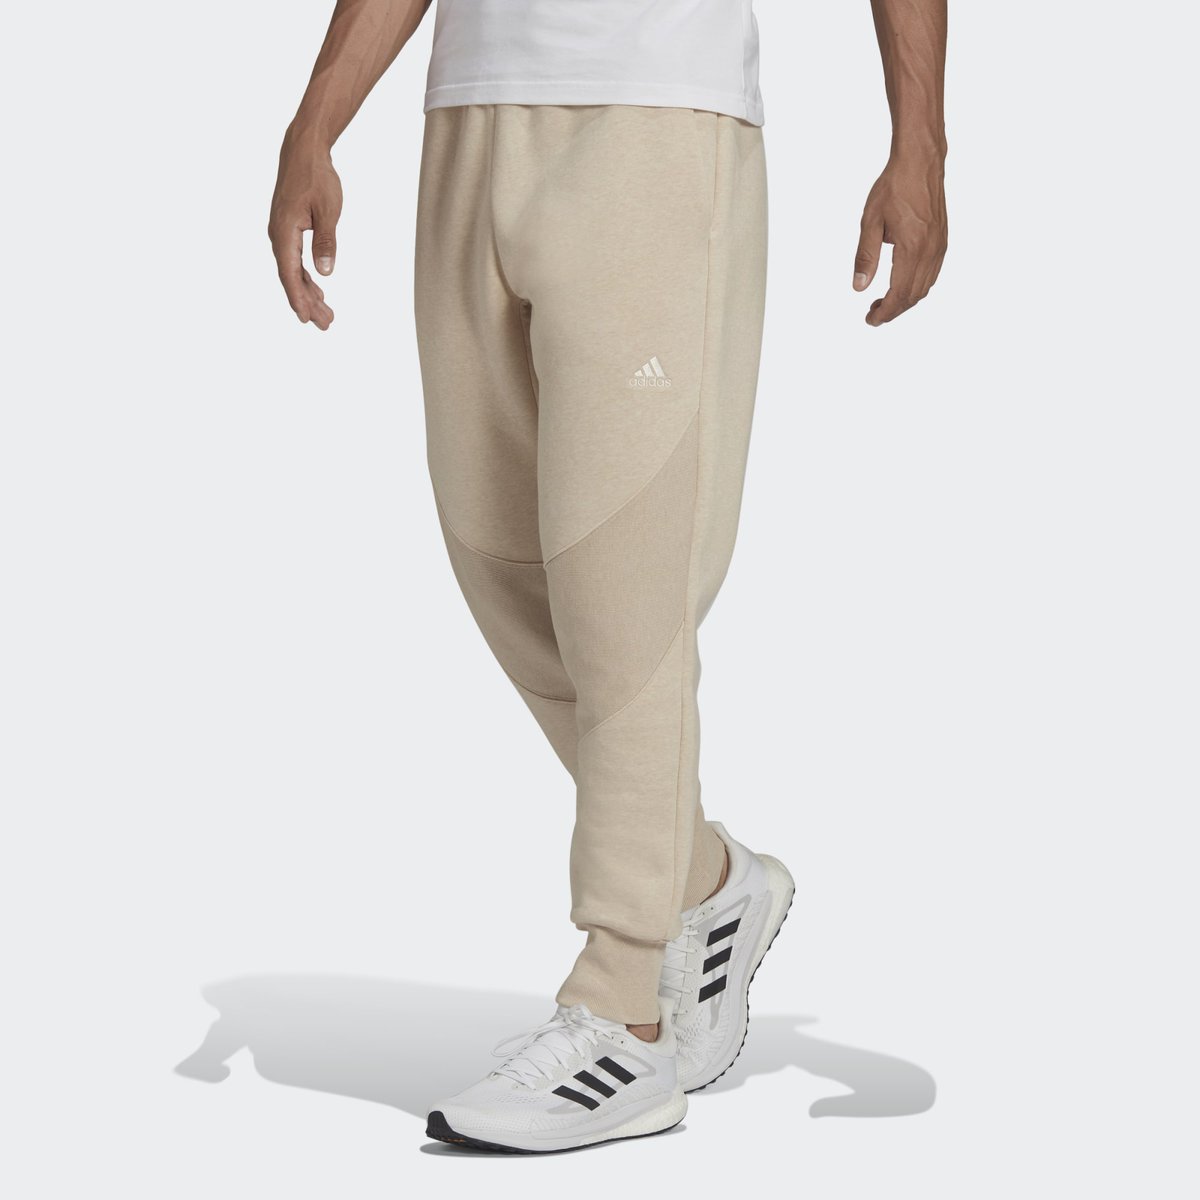 rodar Adulto Cierto adidas alerts a Twitteren: "Now available on #adidas US. adidas Honoring  Black Excellence Wind Pants. —&gt; https://t.co/spO0RJHTec #ad  https://t.co/VZ9I4dOACK" / Twitter